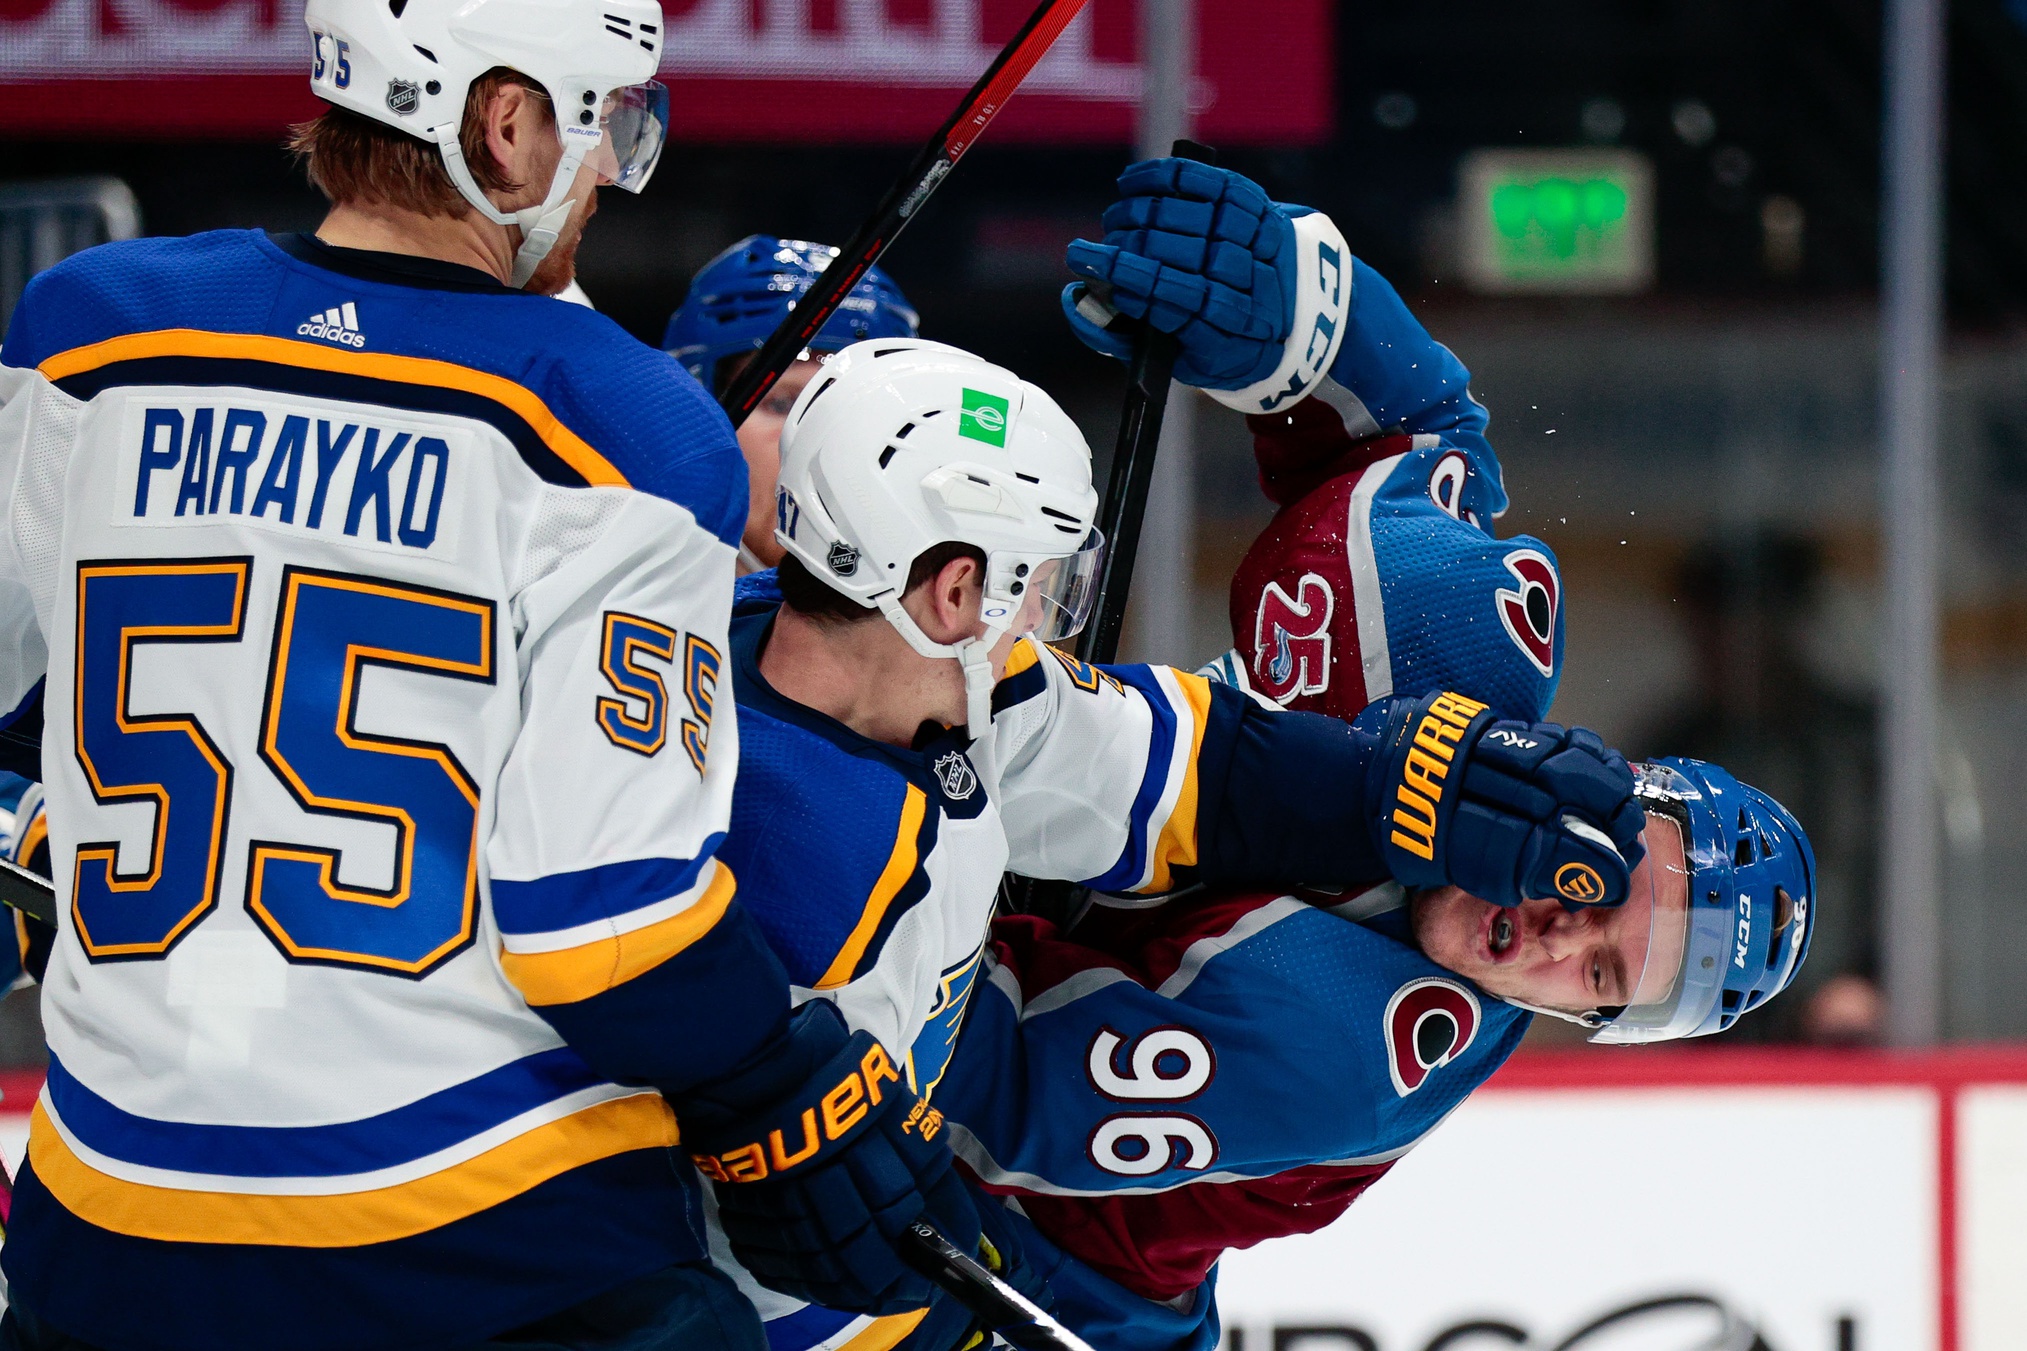 It's way too early for the St. Louis Blues overreactions